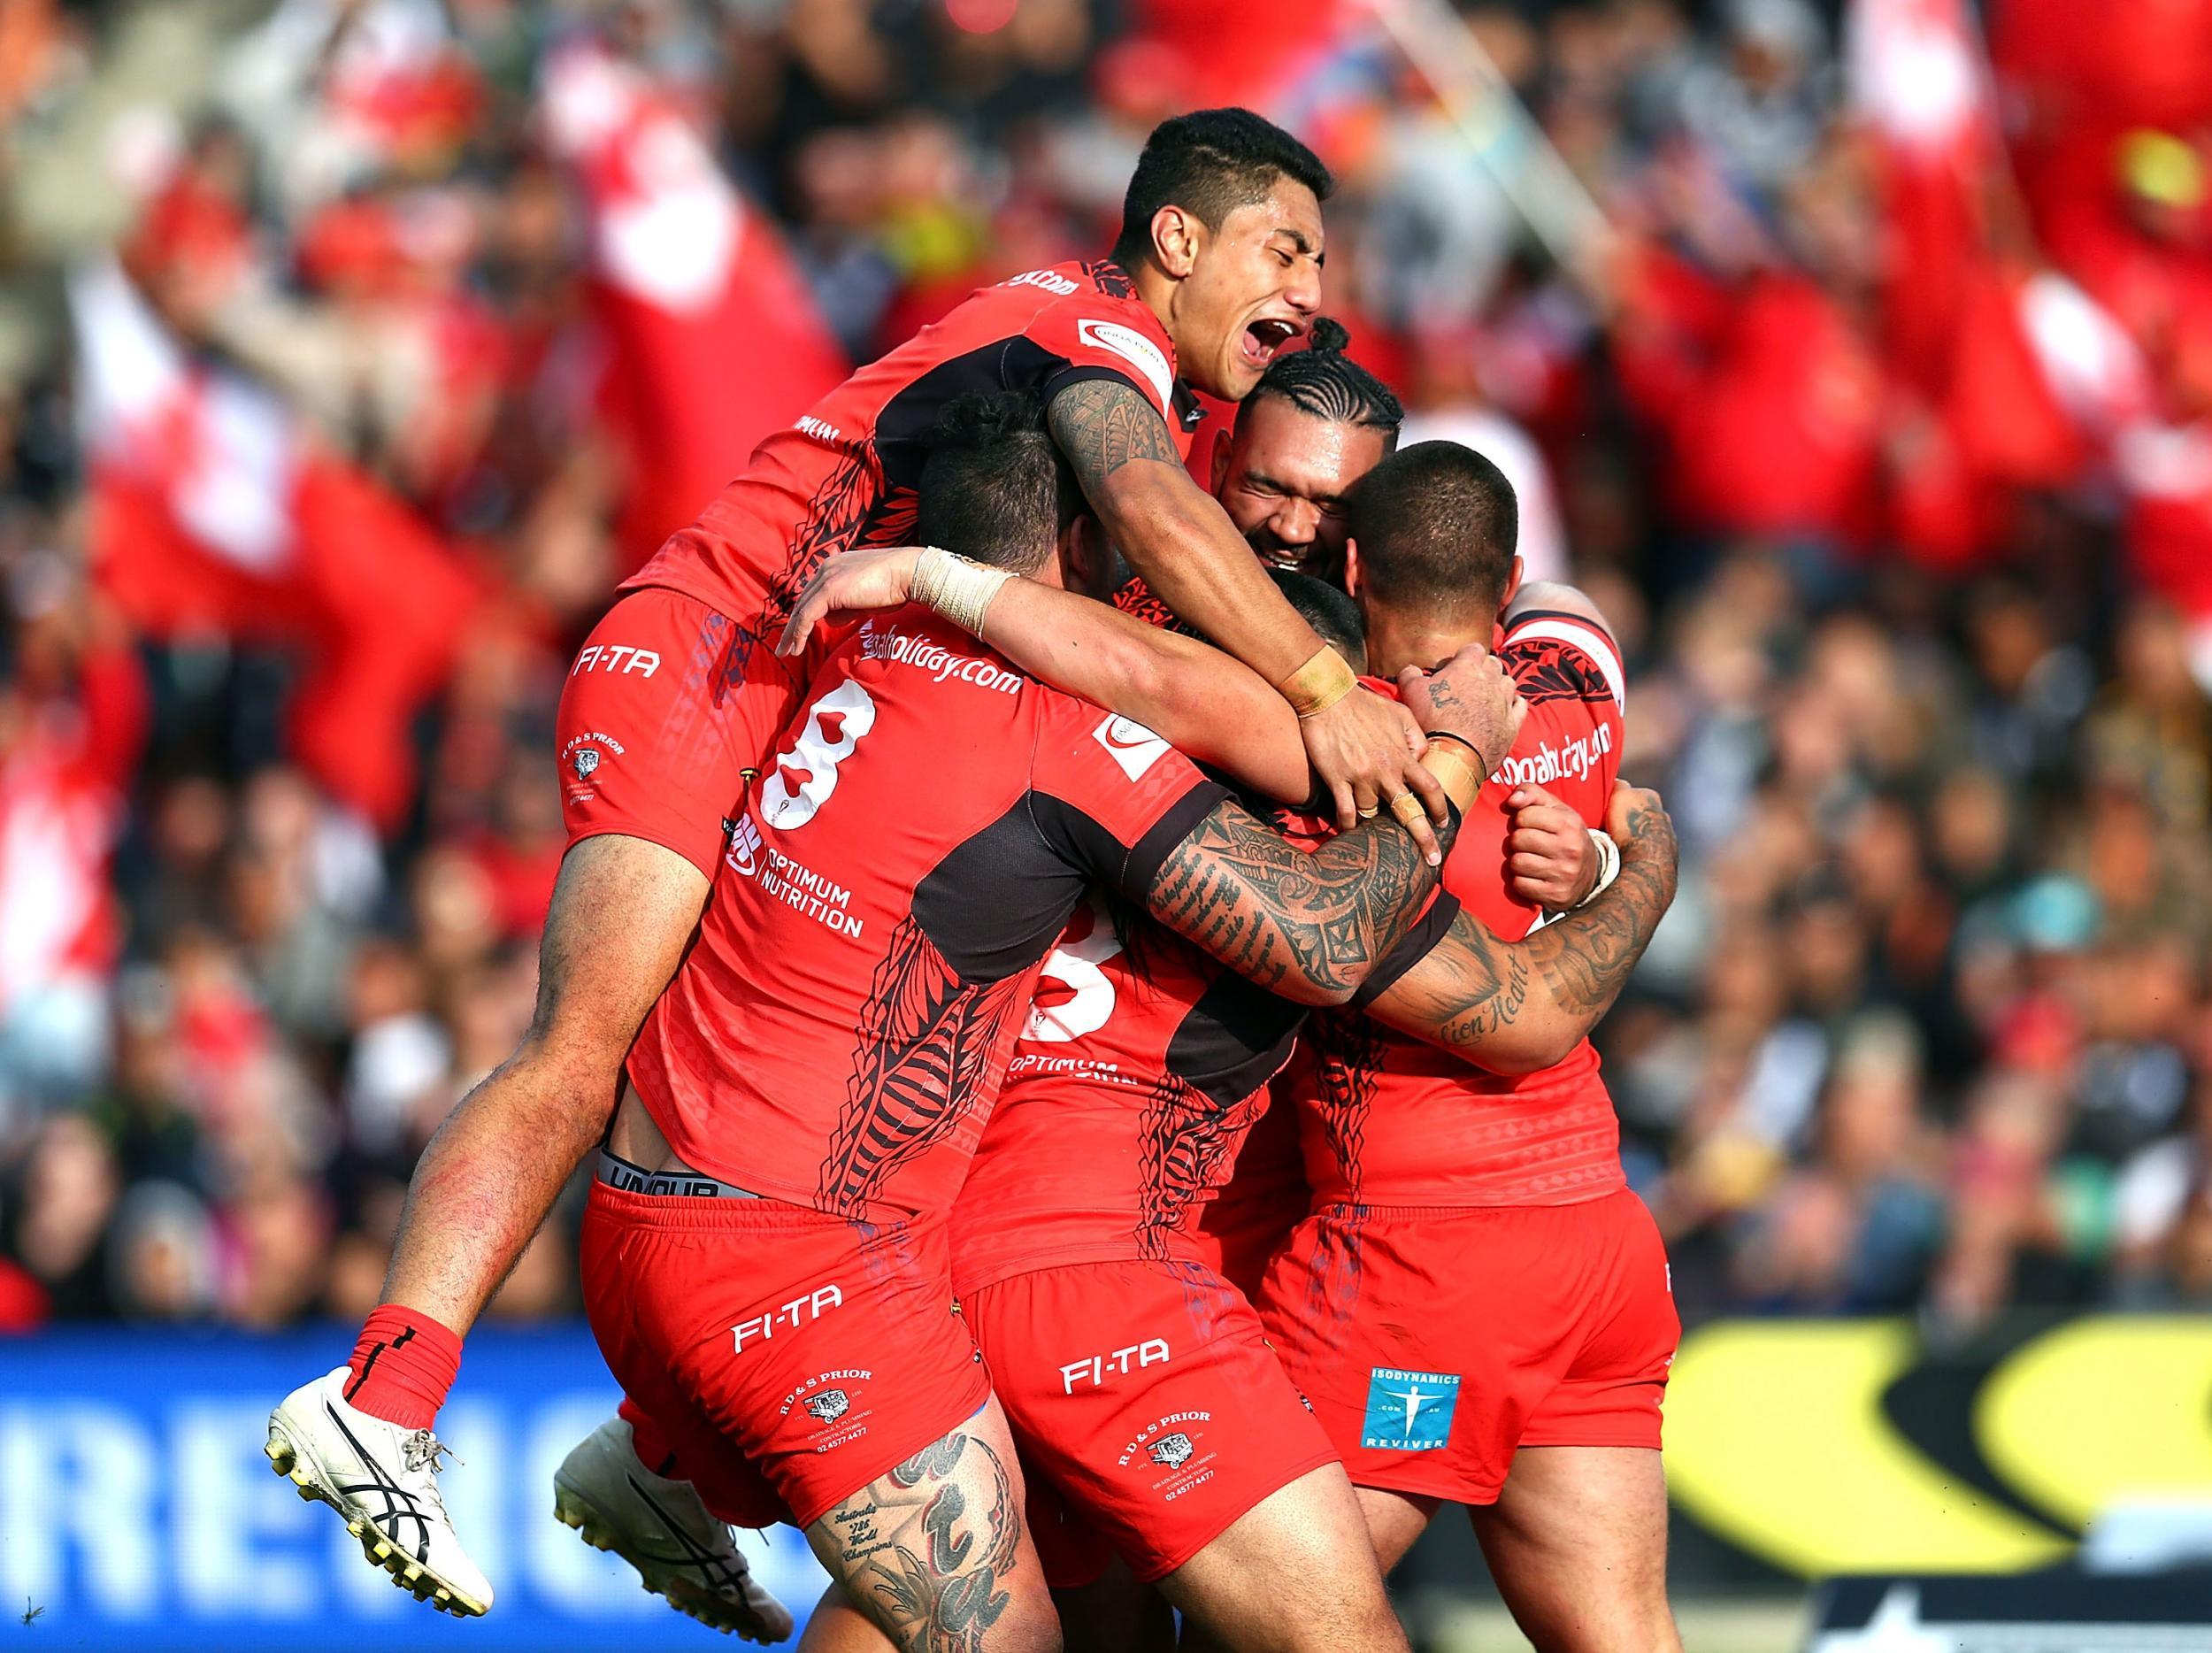 Tonga stunned New Zealand on their own soil to seal top spot in Group B